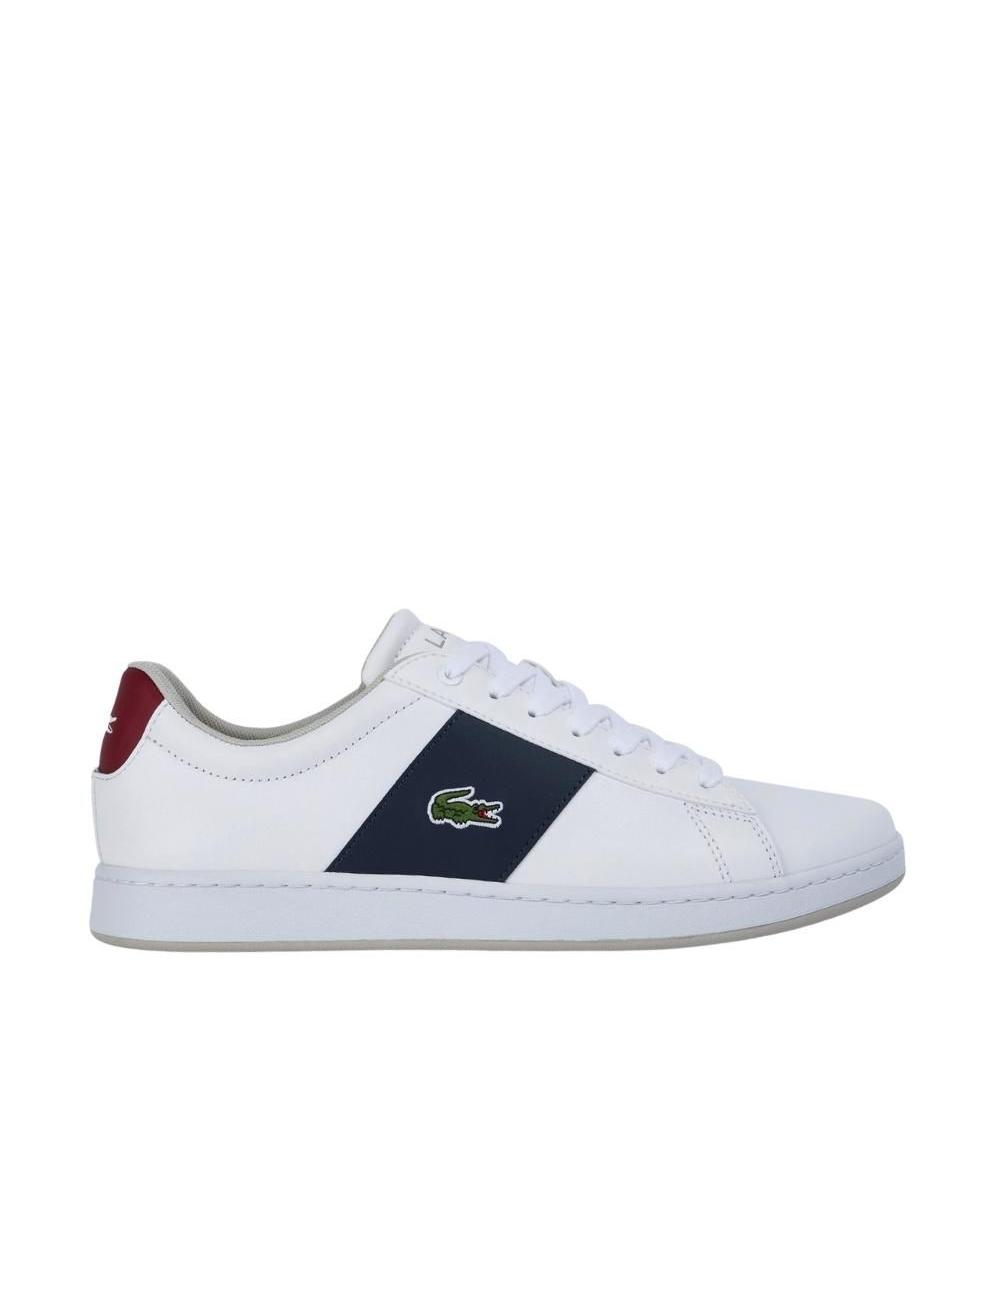 LACOSTE CARNABY EVO CGR 2225 HOMBRE